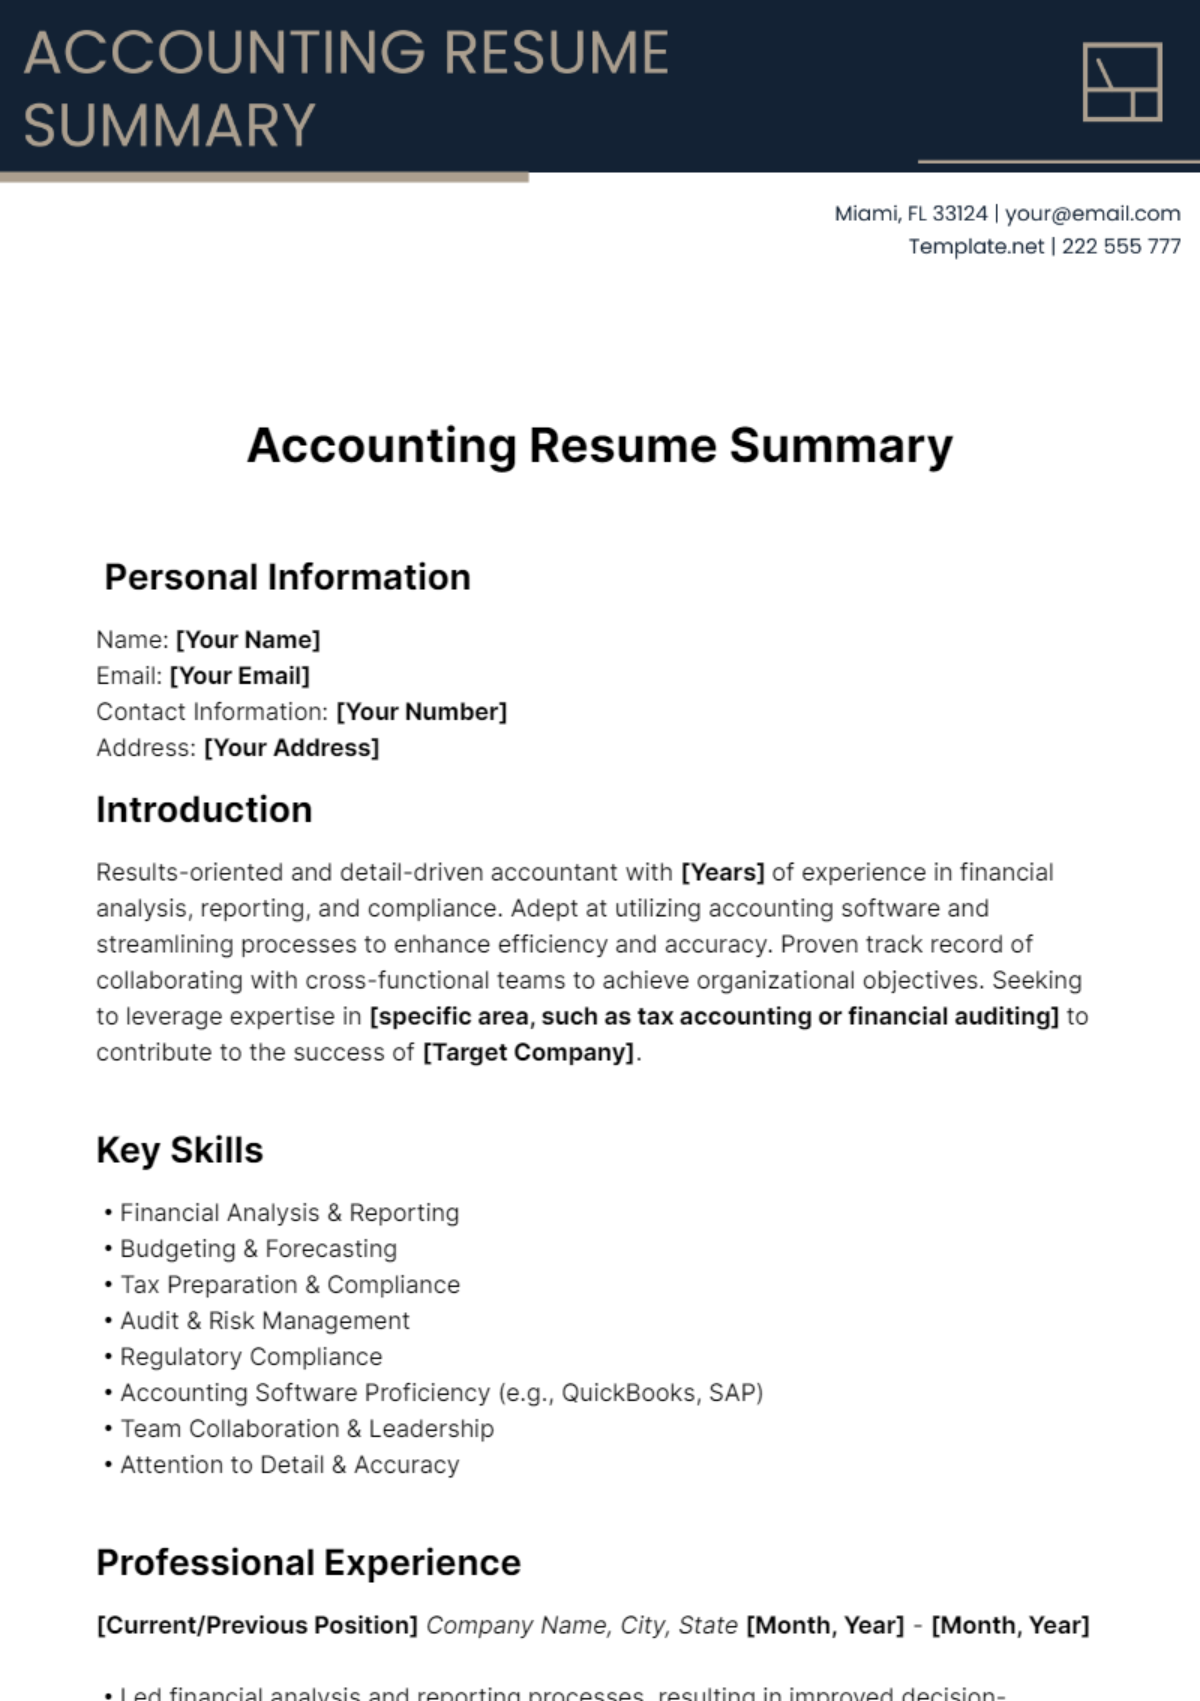 Accounting Resume Summary Template